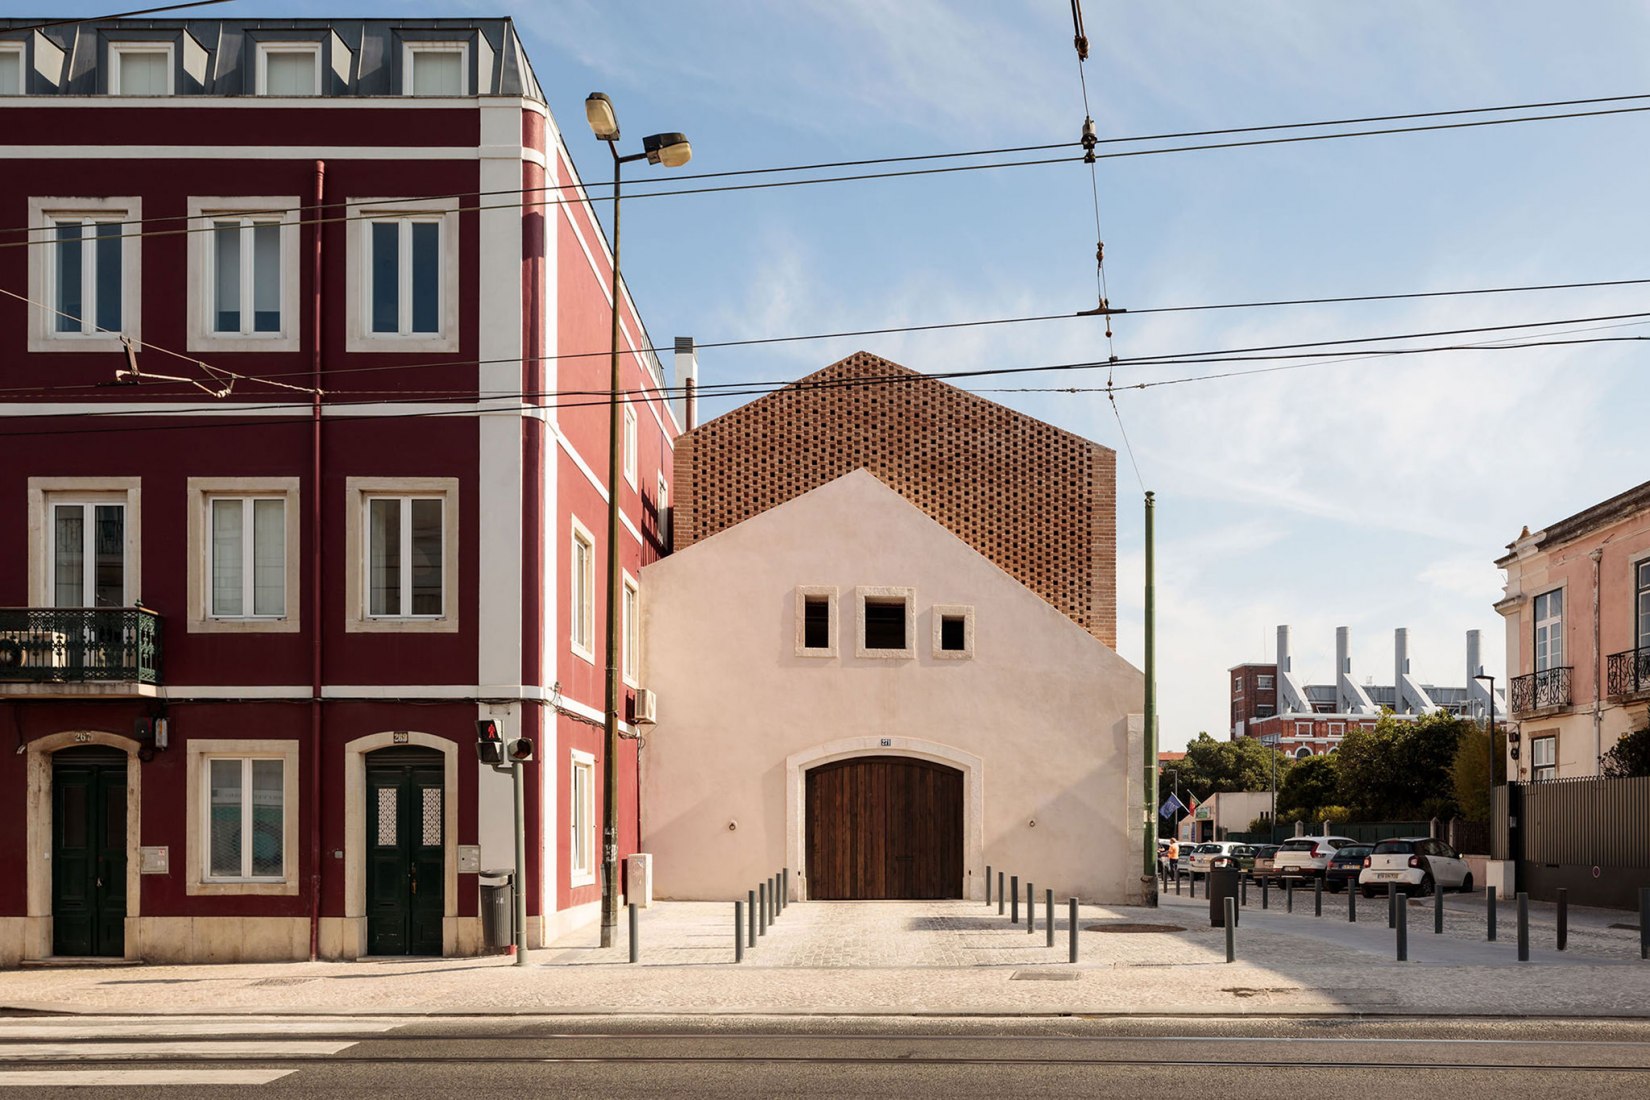 Altinho House in Lisbon by António Costa Lima. Photograph by Francisco Nogueira